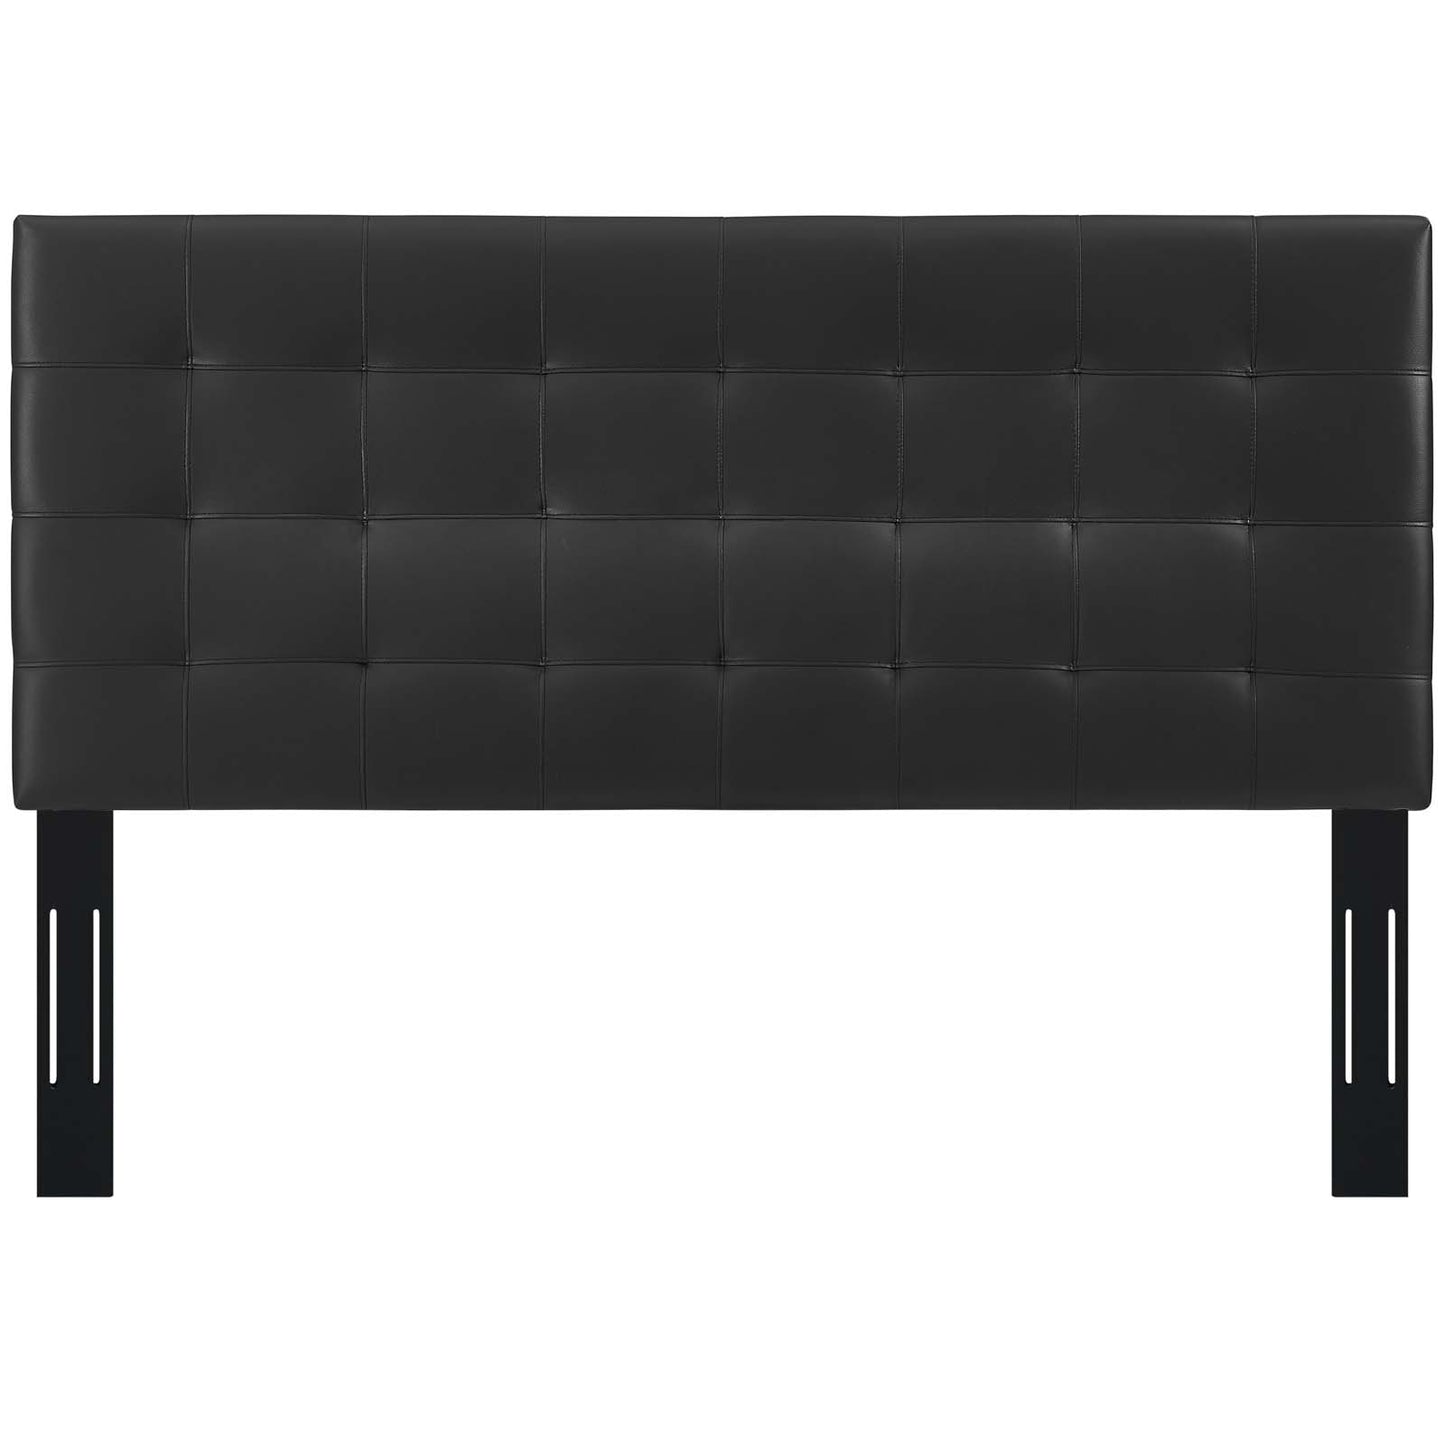 Paisley Tufted Full / Queen Upholstered Faux Leather Headboard Black MOD-5854-BLK